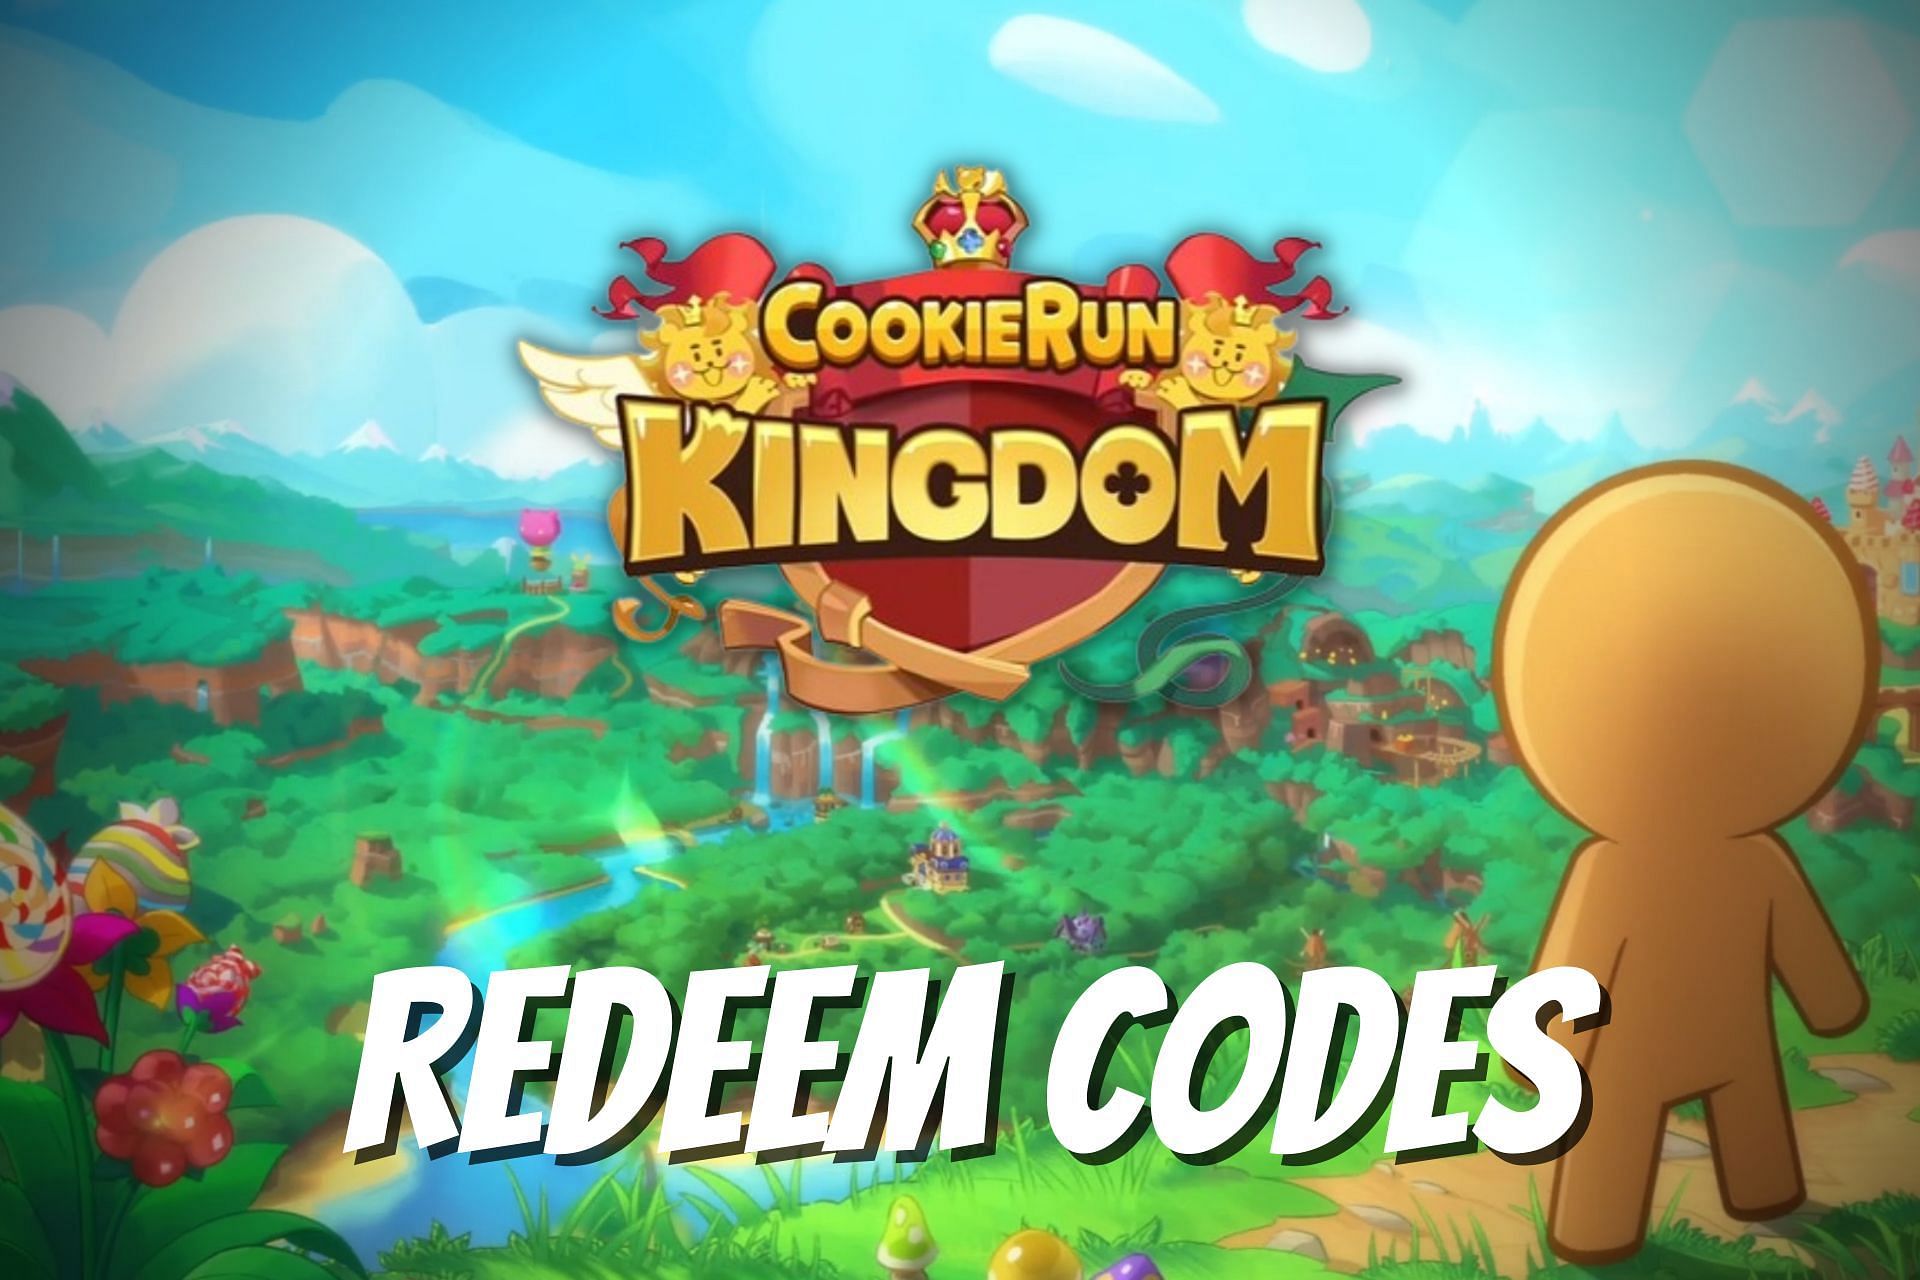 Players should make sure to avail the redeem codes as they are not very frequently released. Image via Sportskeeda.